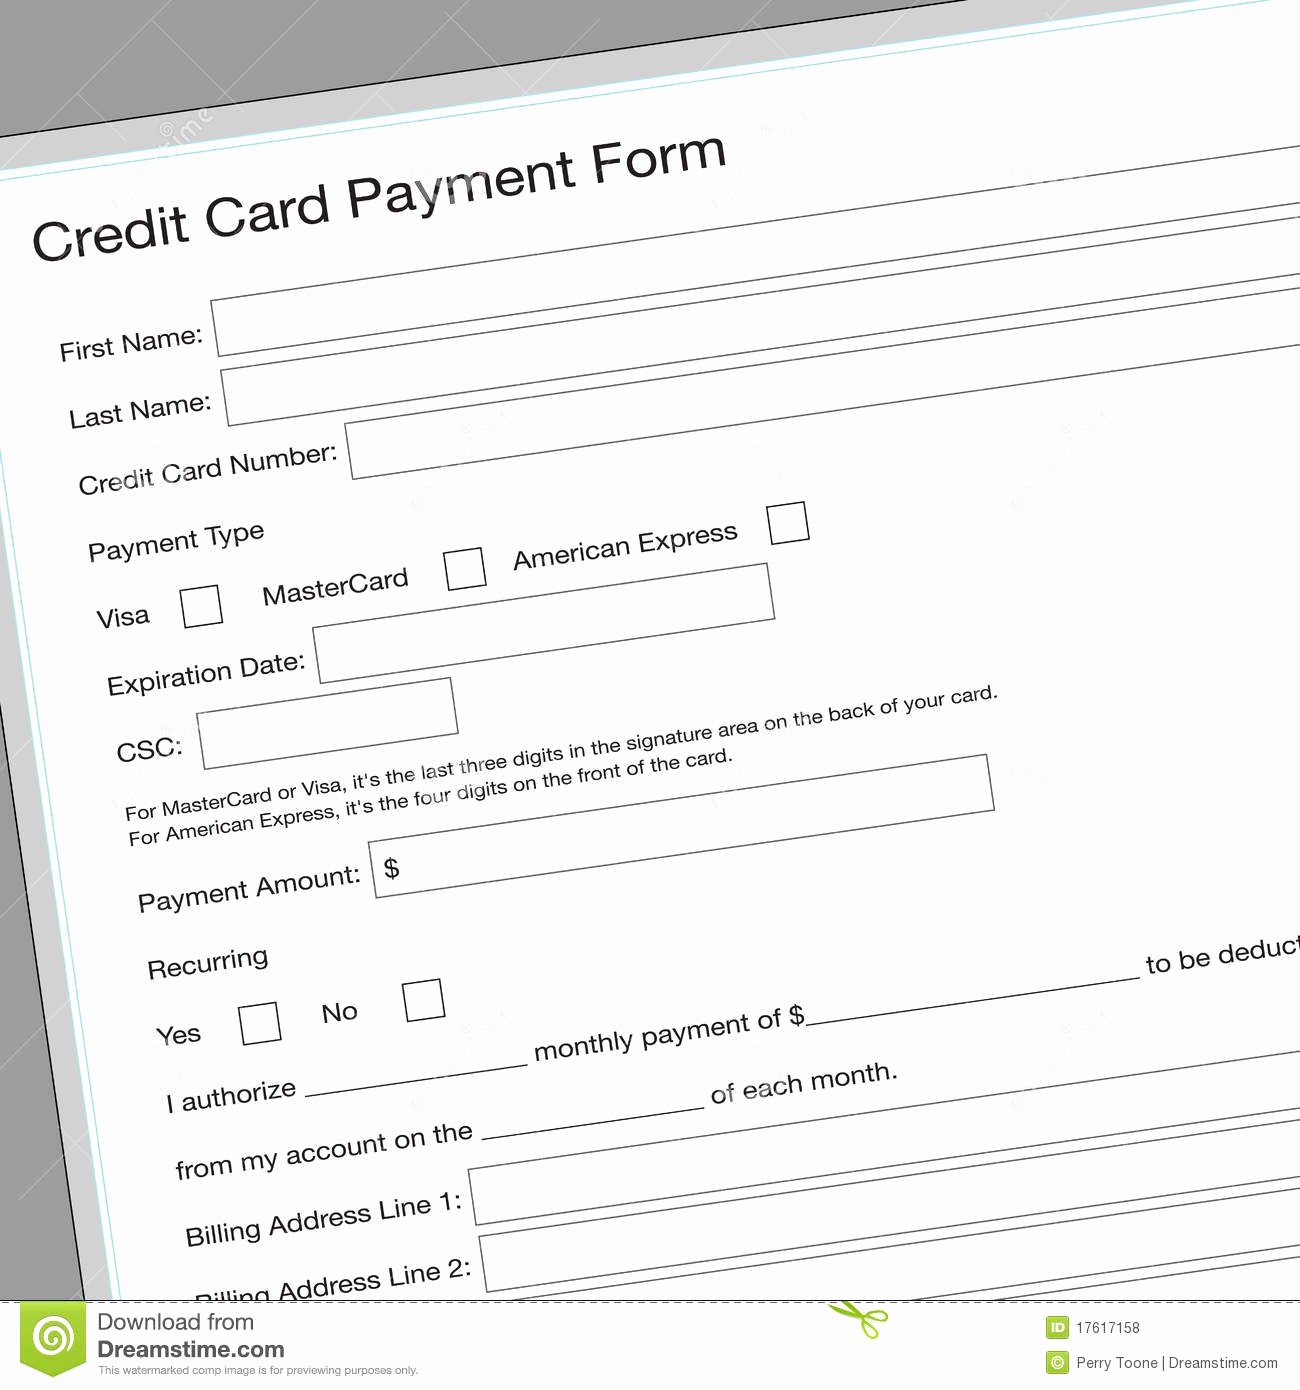 Credit Card Sign Out Sheet New Credit Card Application form Royalty Free Stock S